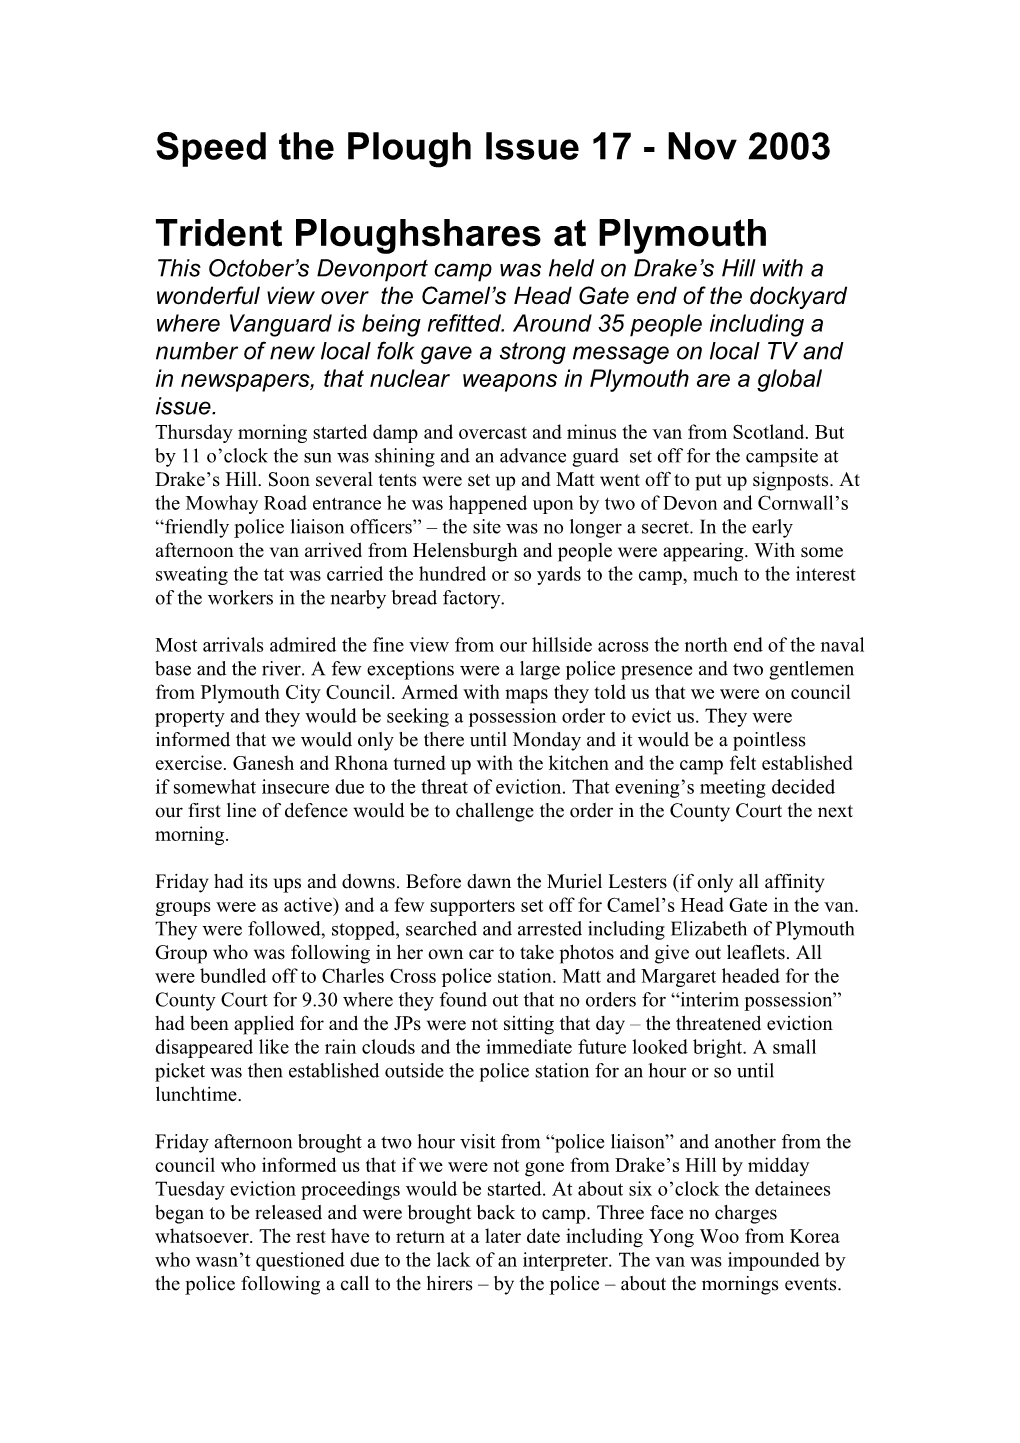 Trident Ploughshares at Plymouth